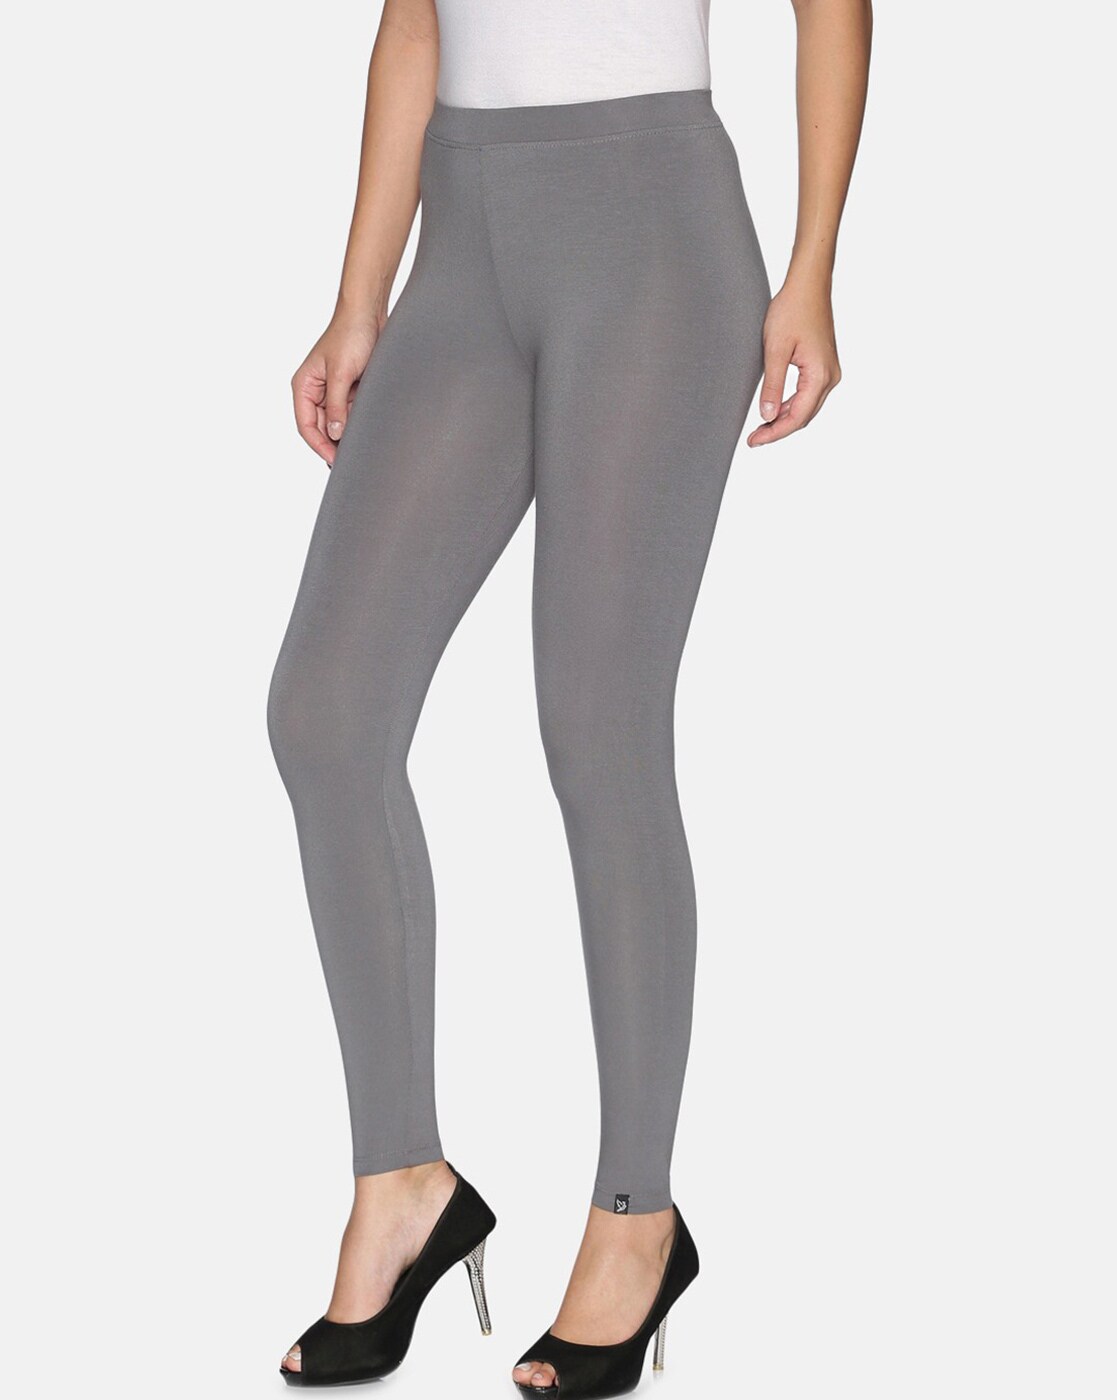 Lycra Casual Leggings in Black and Grey with Thread work | Leggings casual,  Casual black, Black and grey